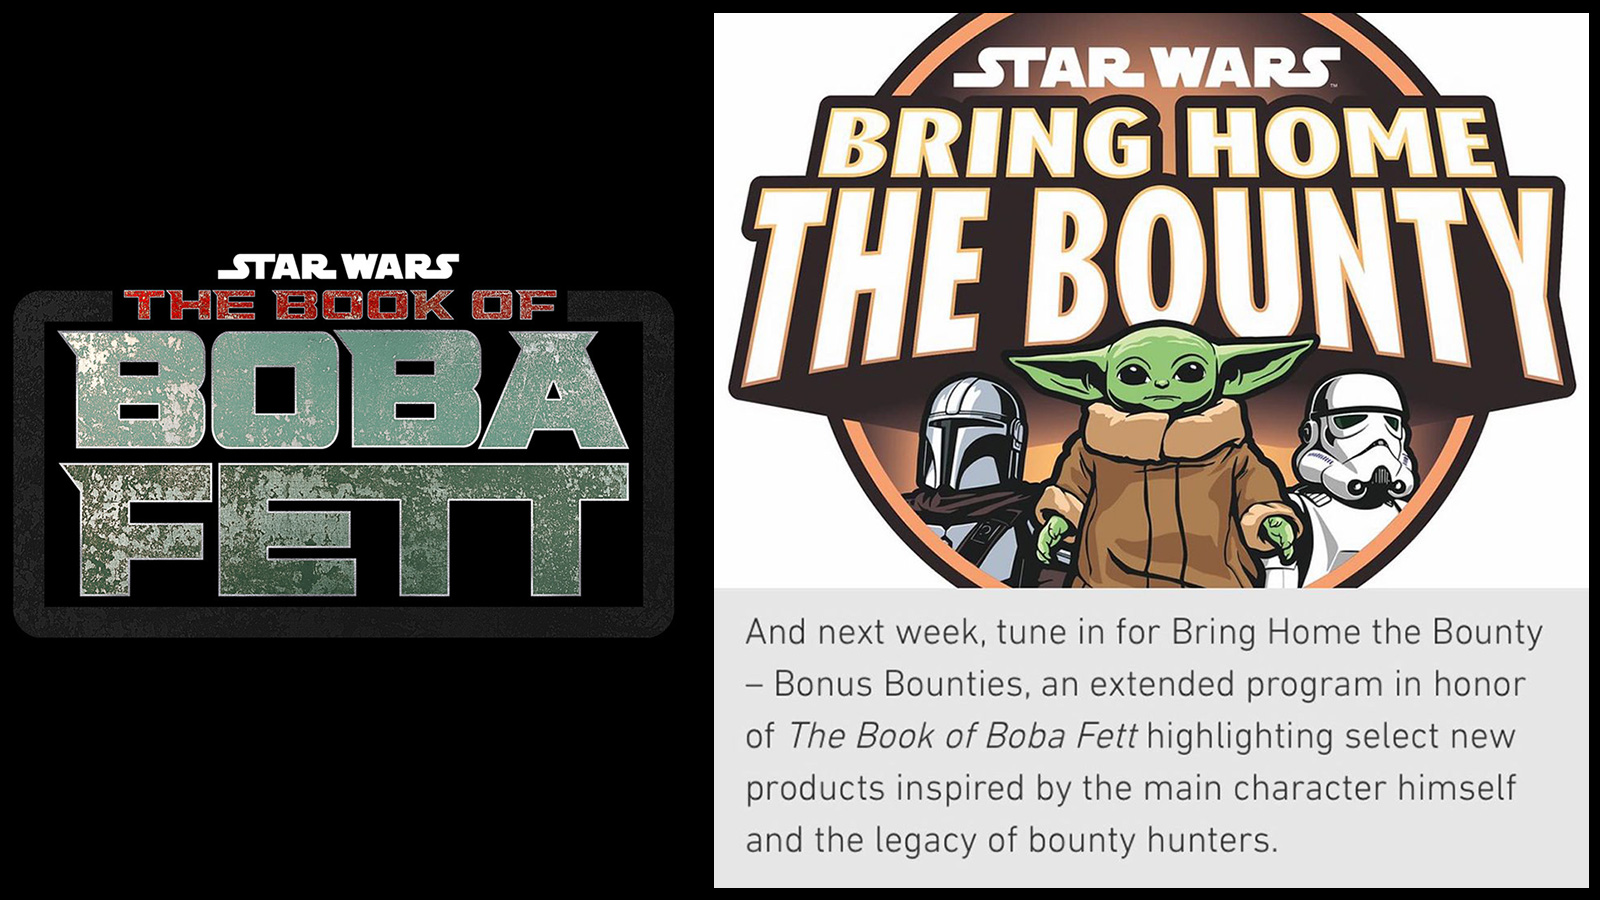 Press Release - The Book Of Boba Fett “Bonus Bounties” (New Product Reveals And Preorders) Jan 4 - Feb 15